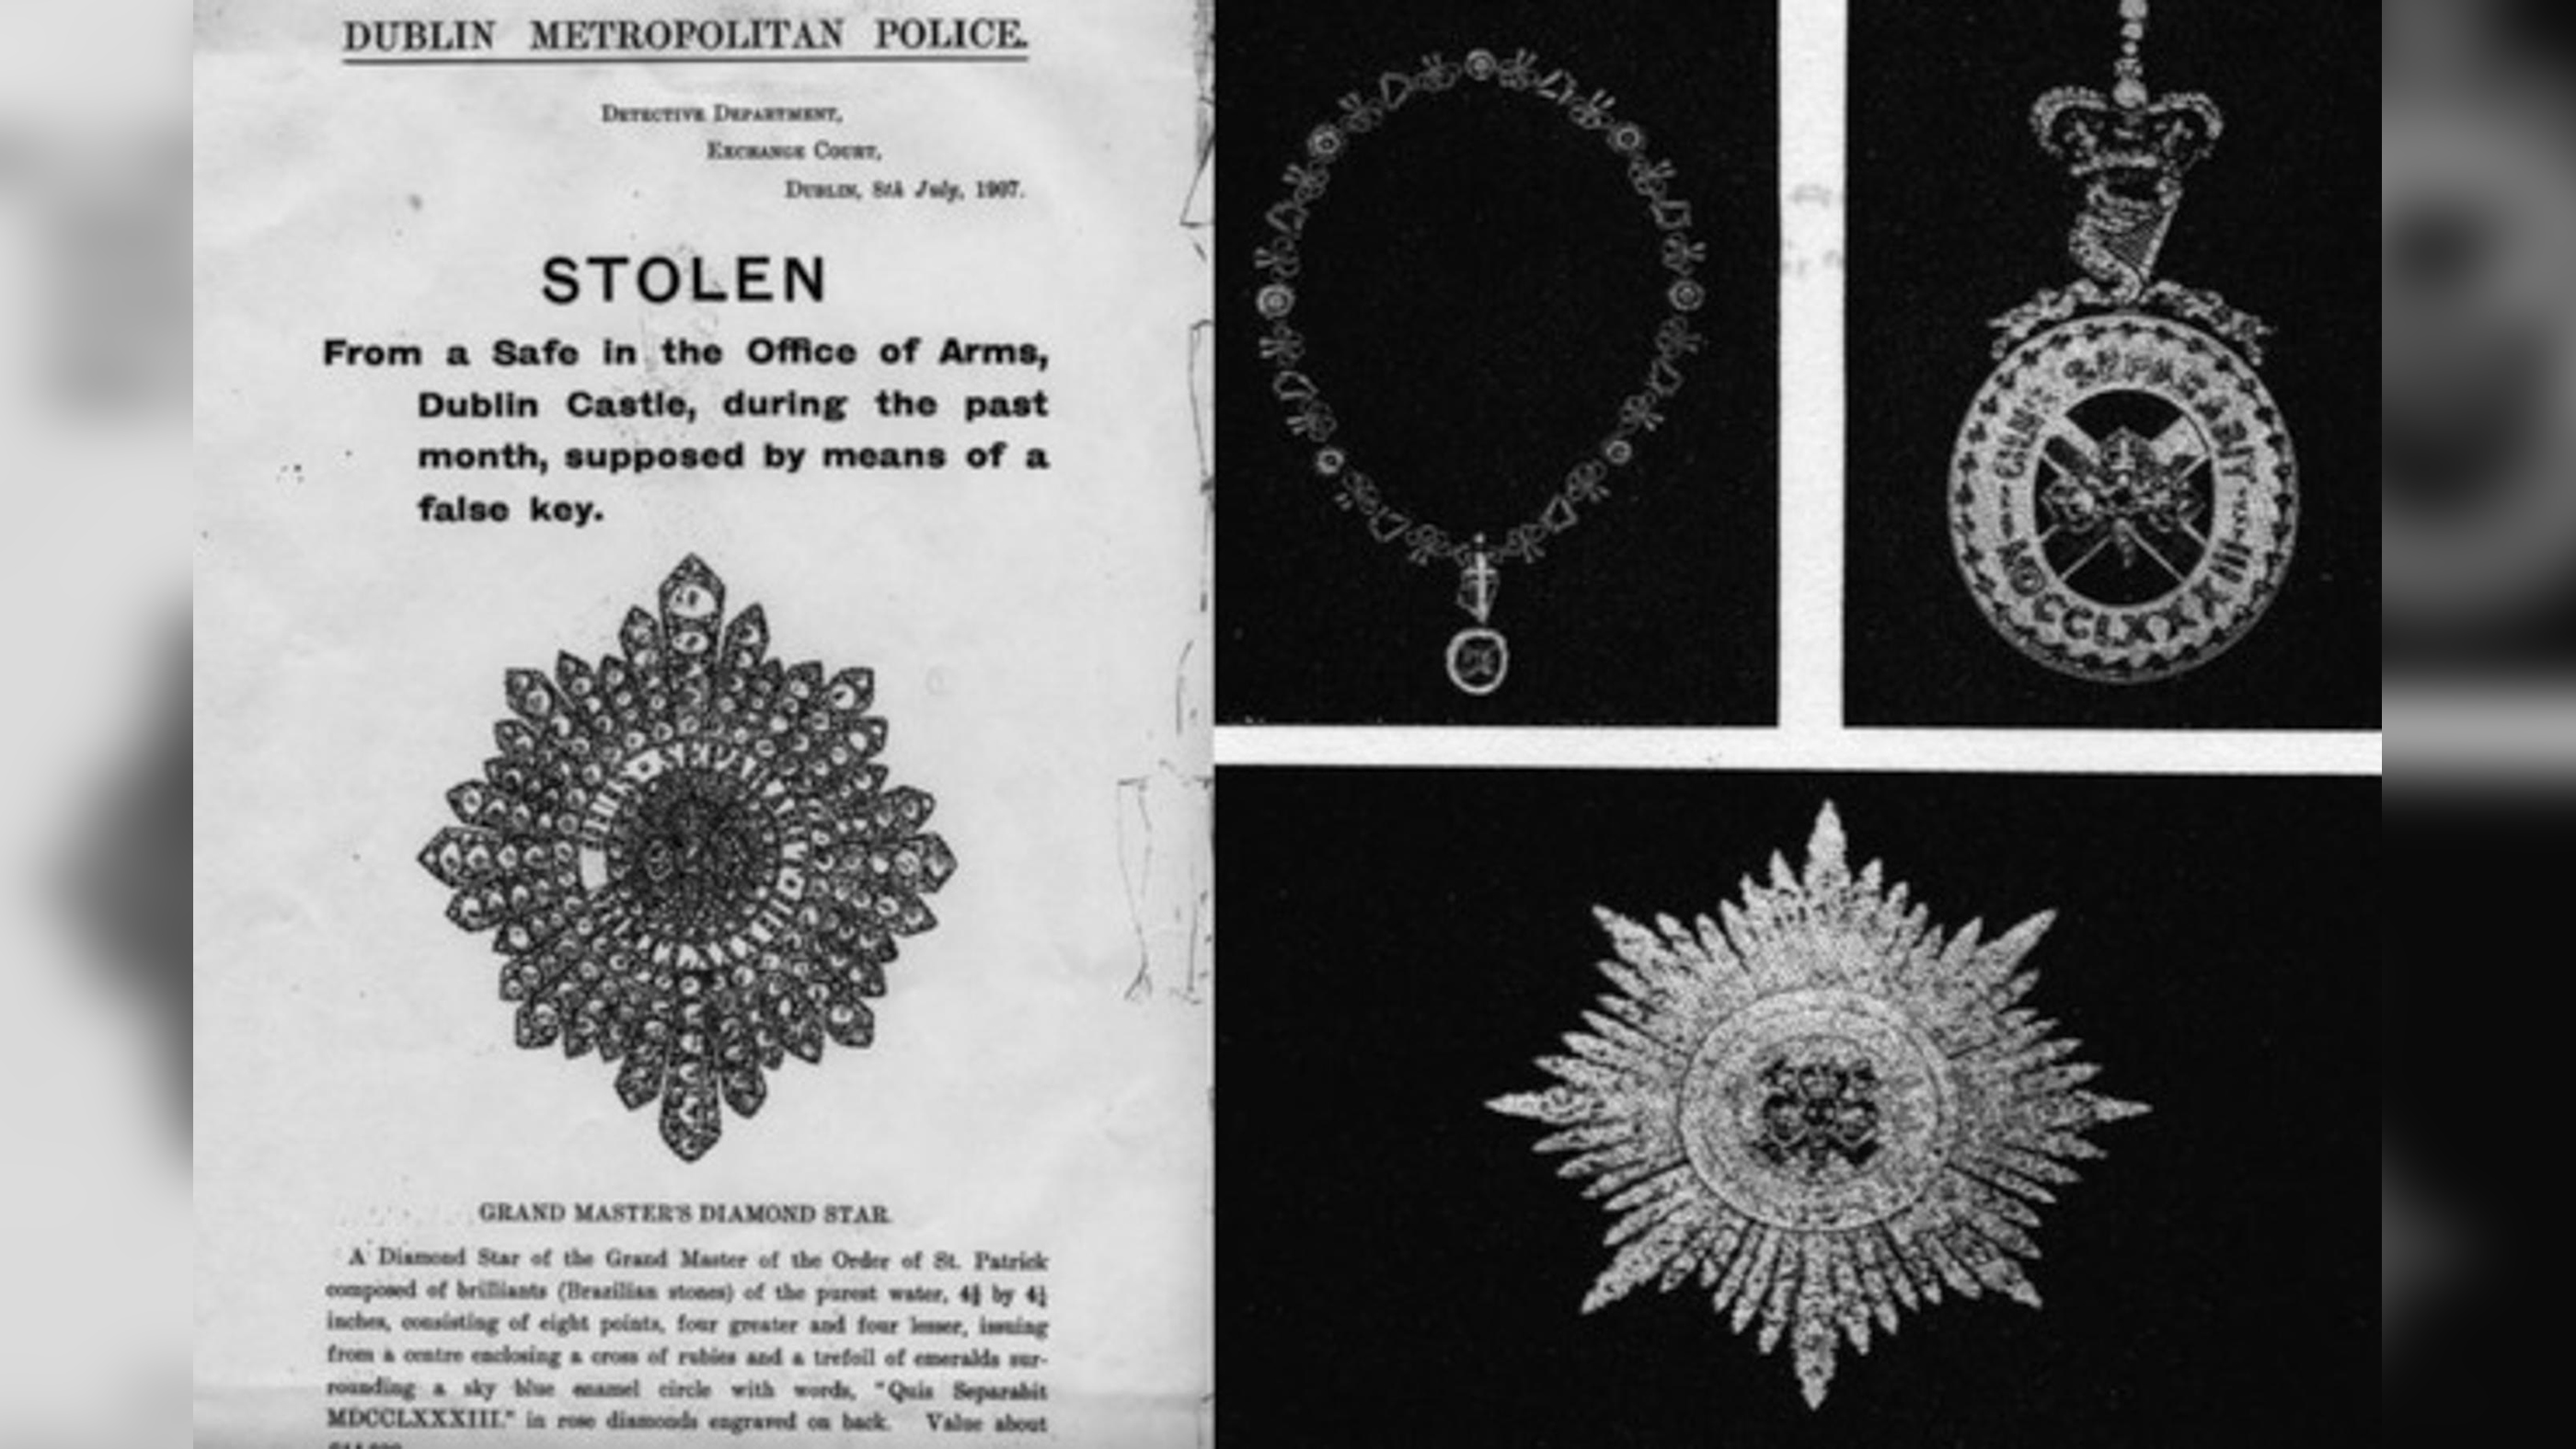 A pamphlet from the police showing the Irish Crown Jewels that were stolen from a safe in the Dublin Castle.